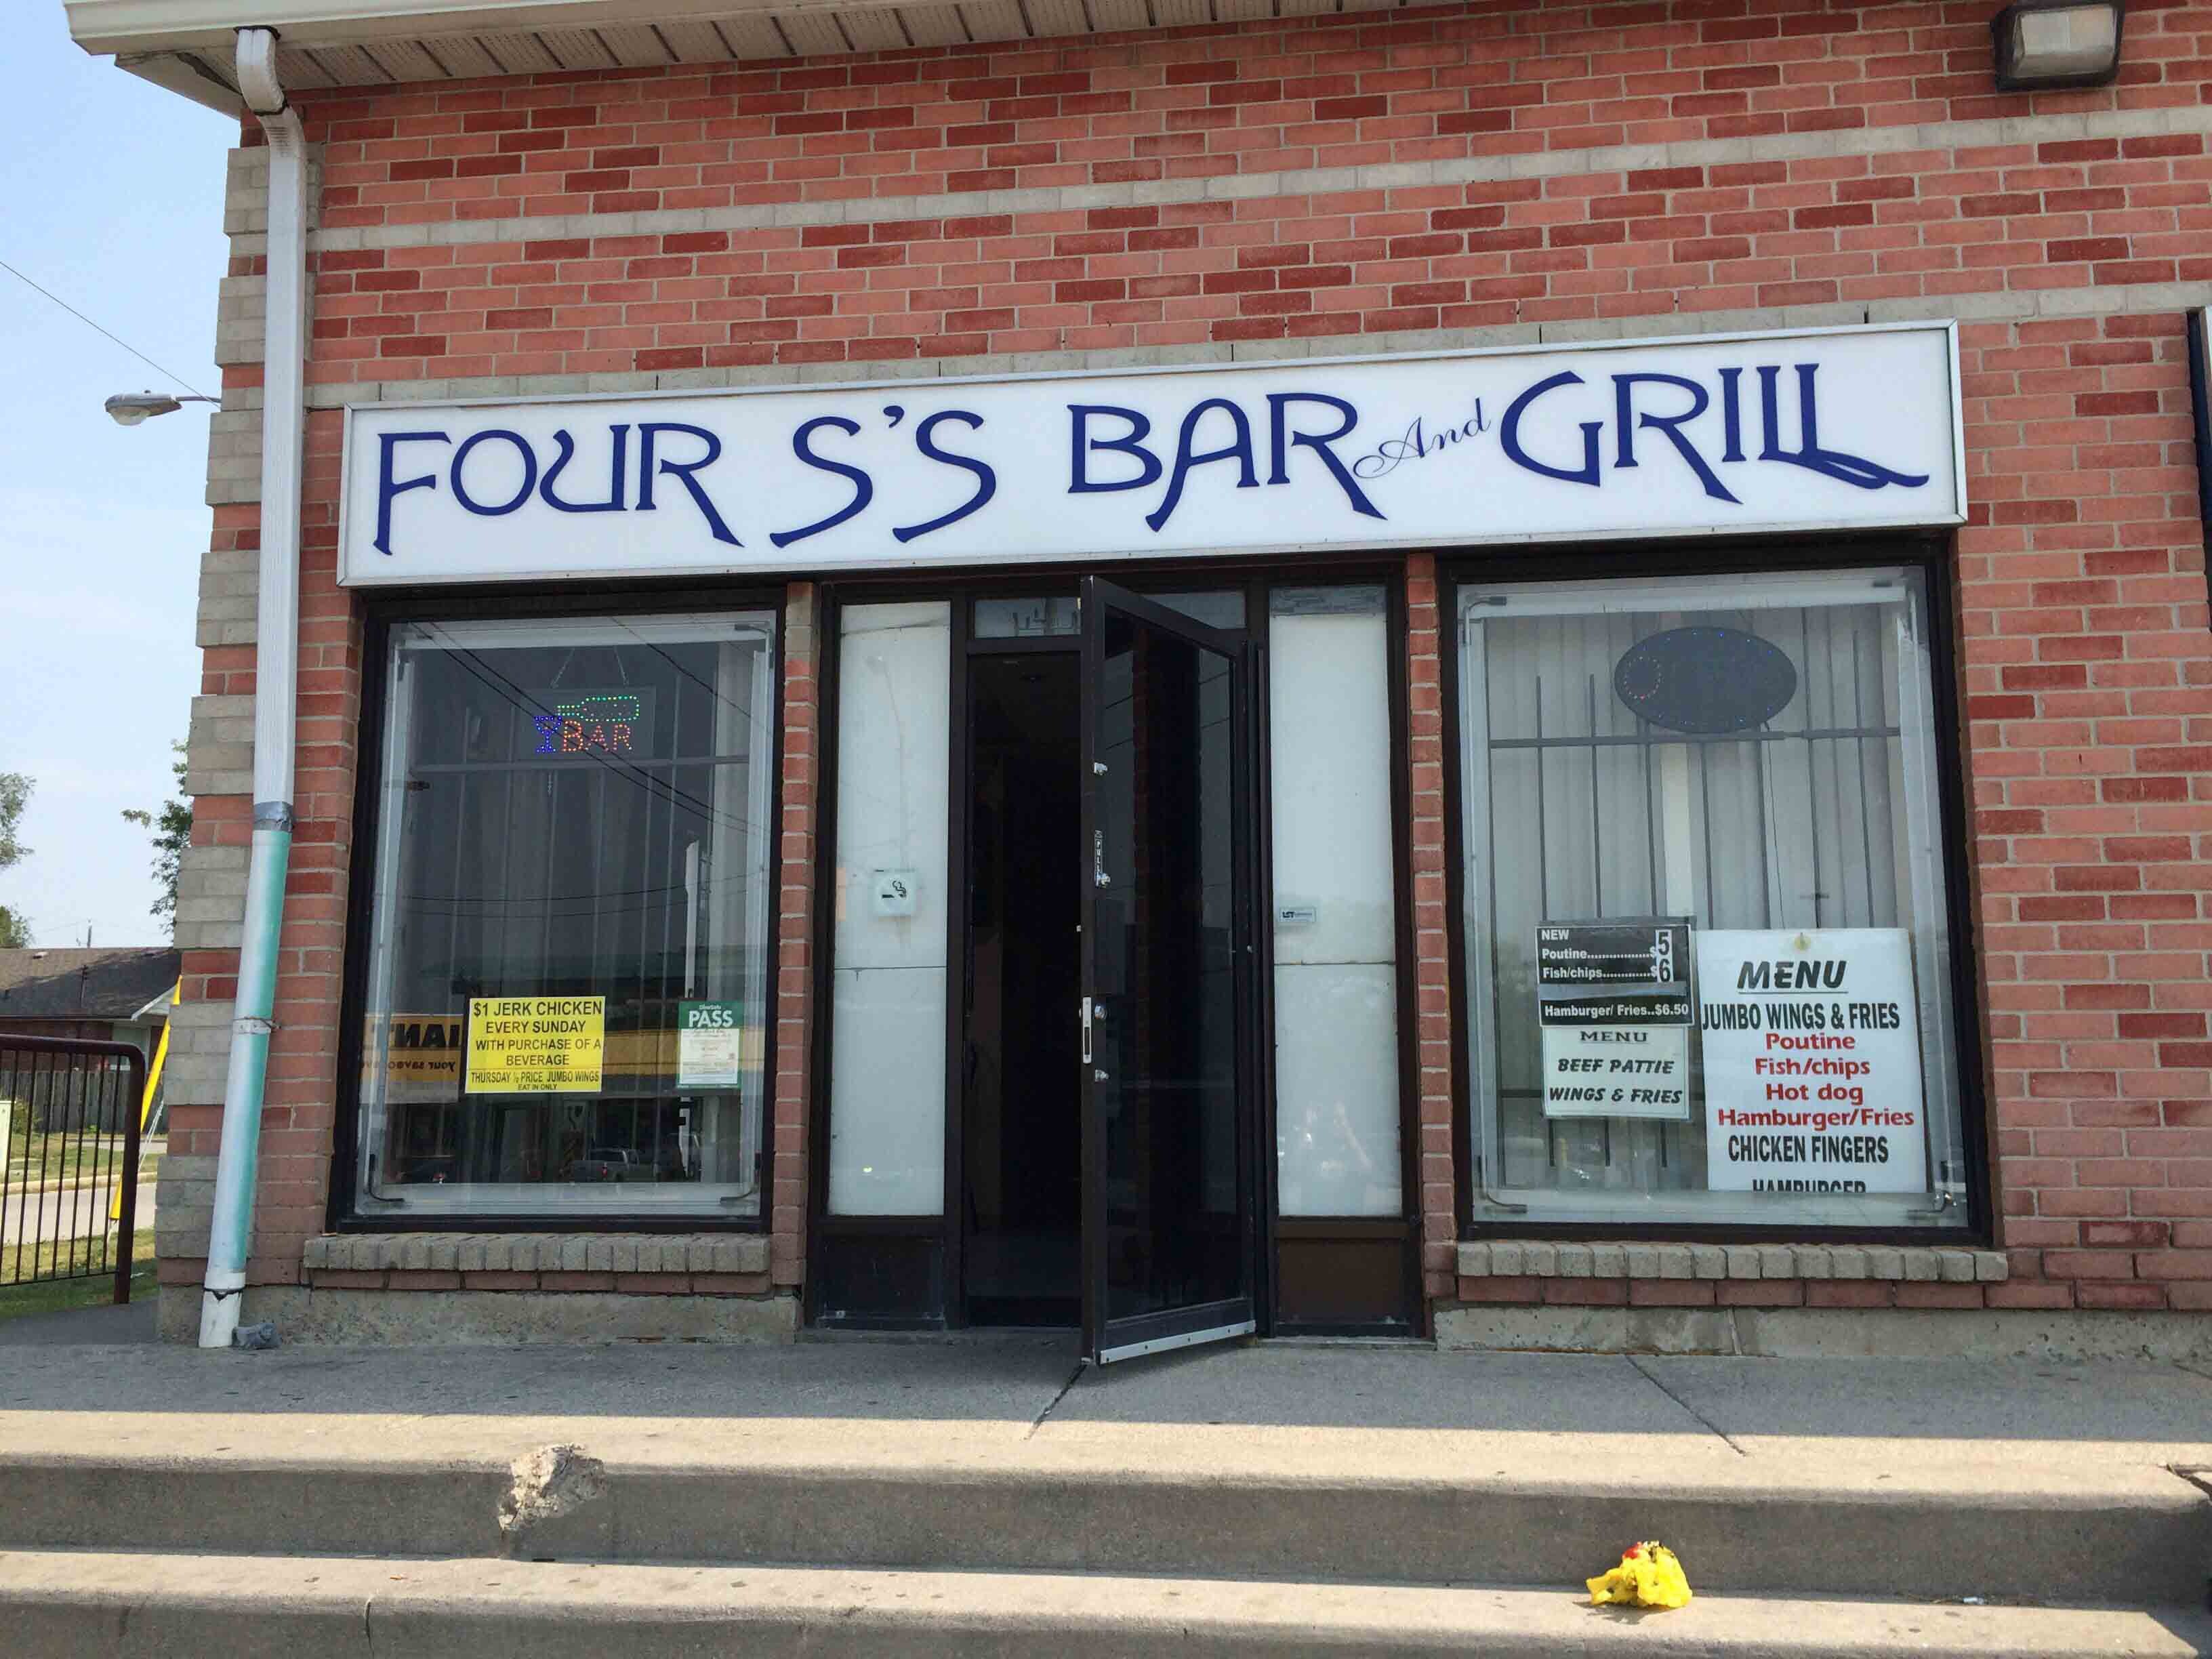 Four S's Bar & Grill